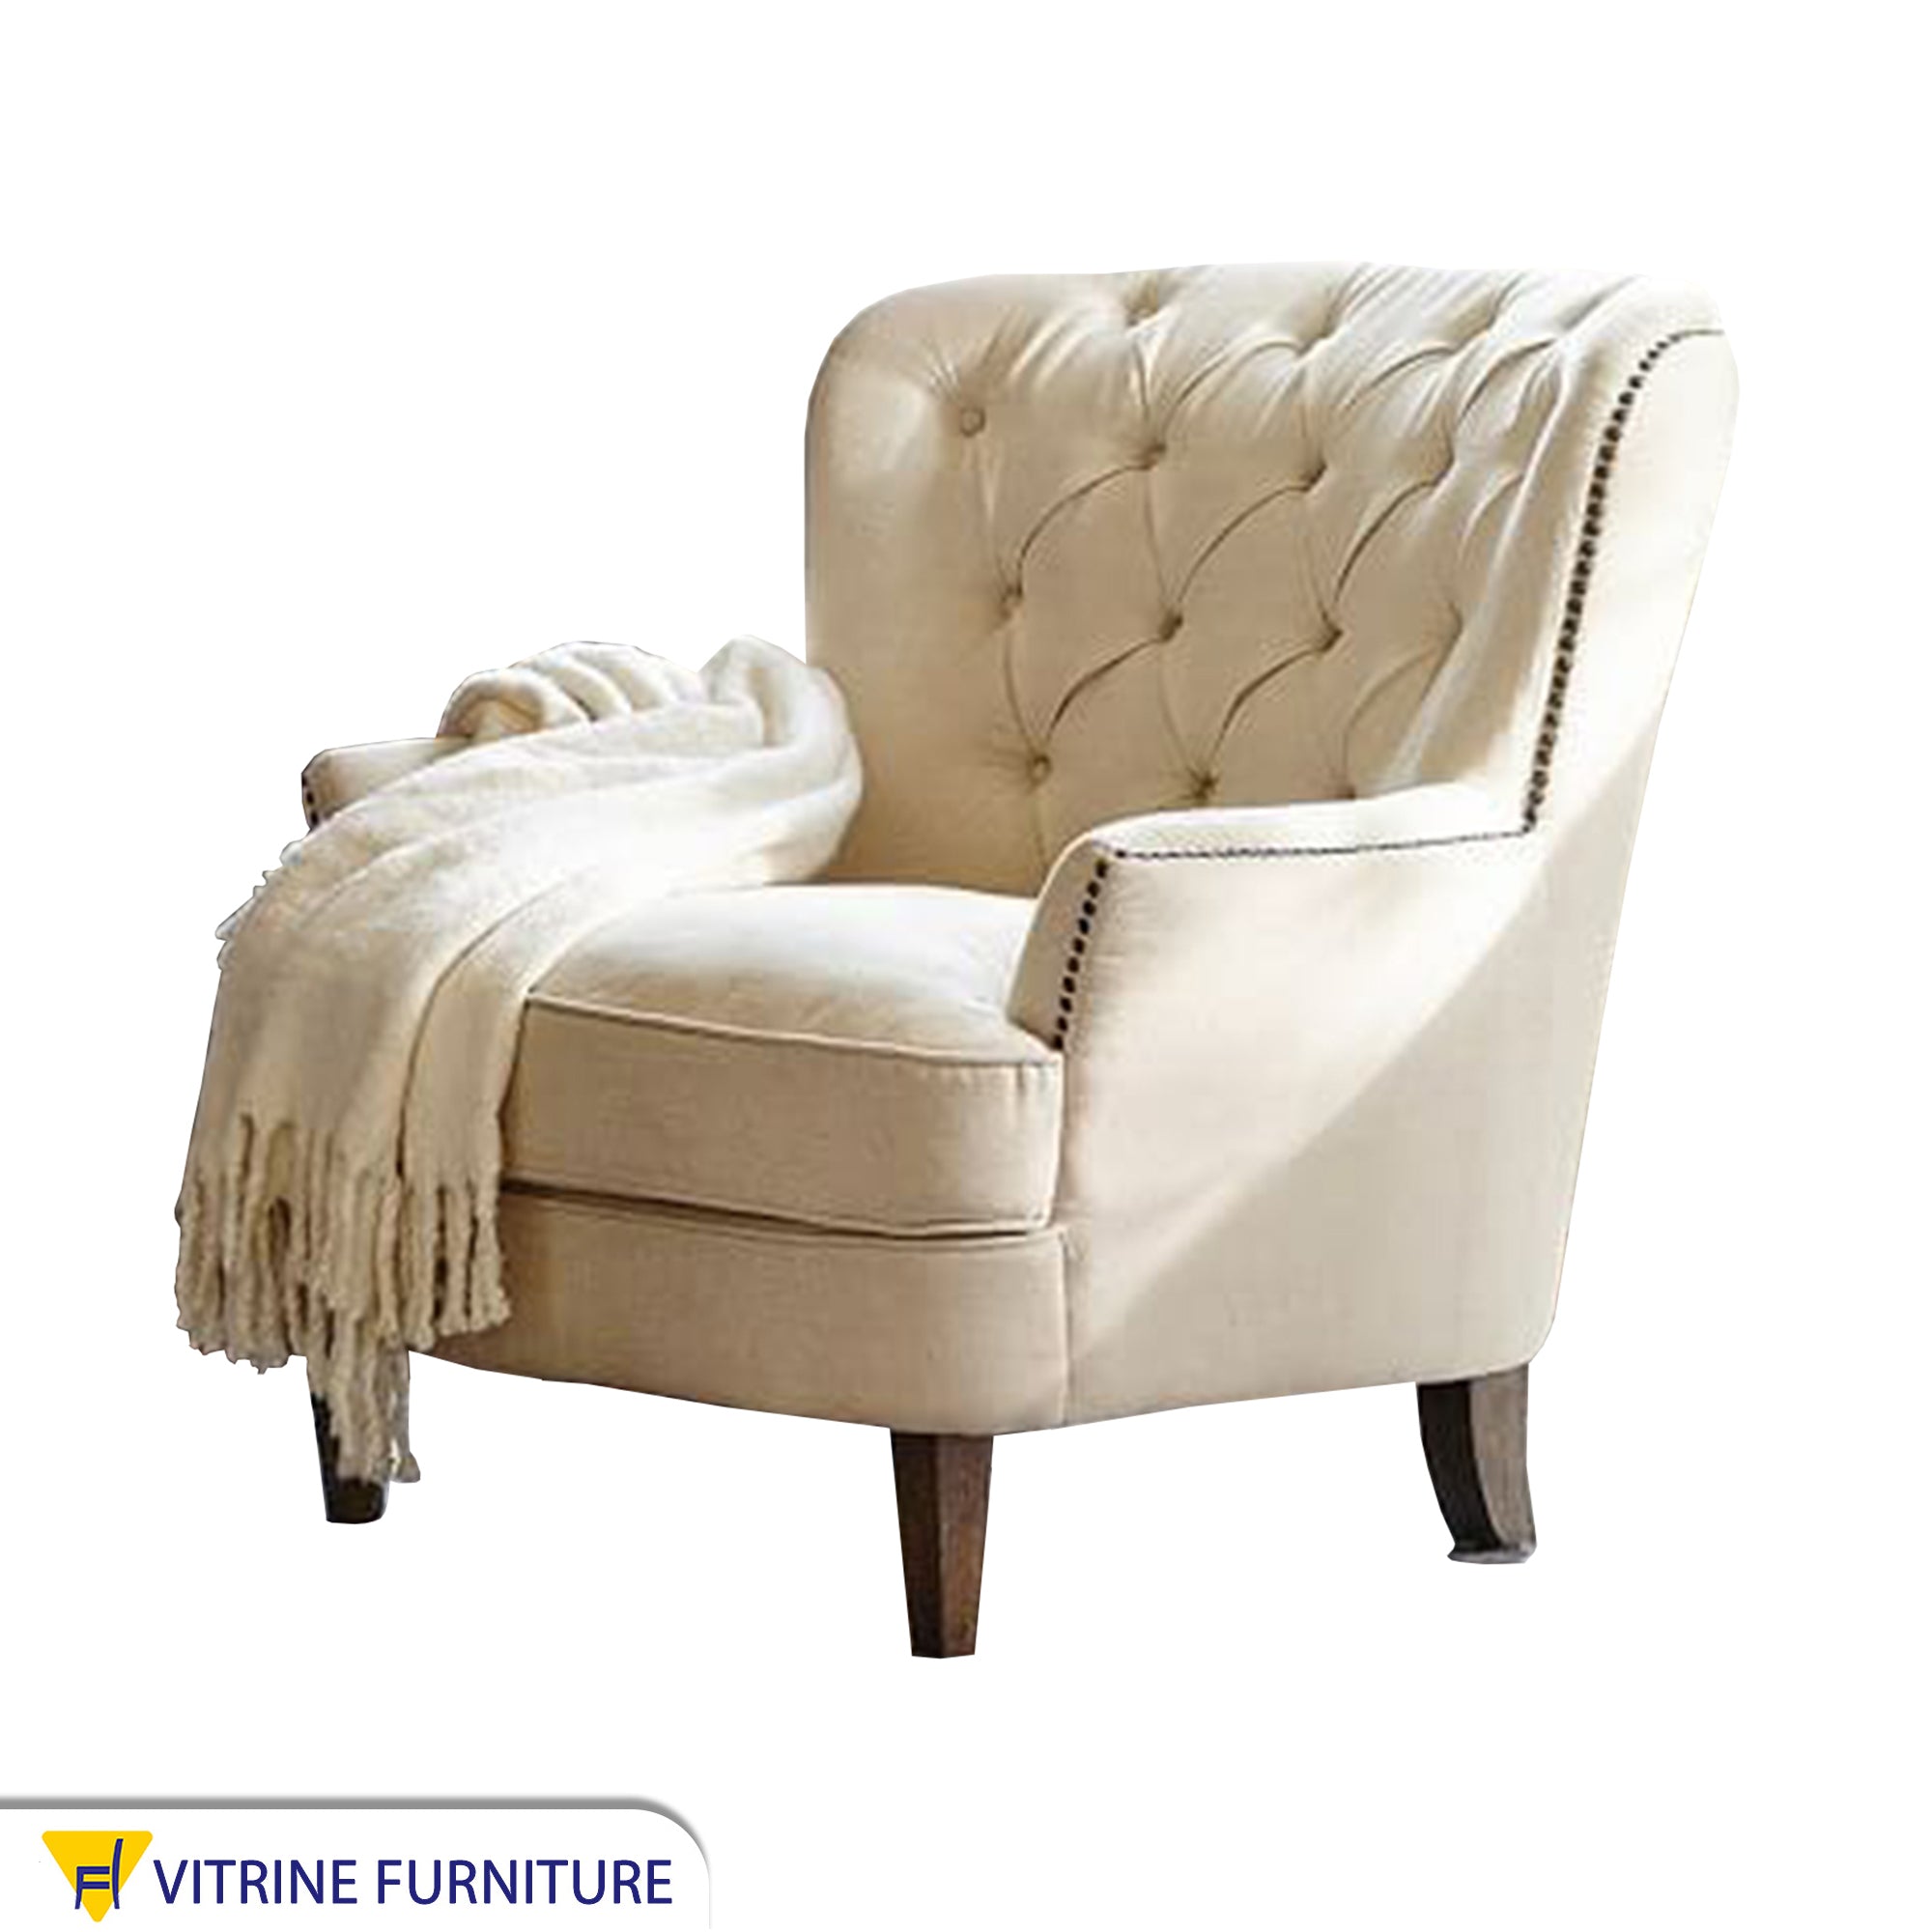 Off-white footstool chair with curved back